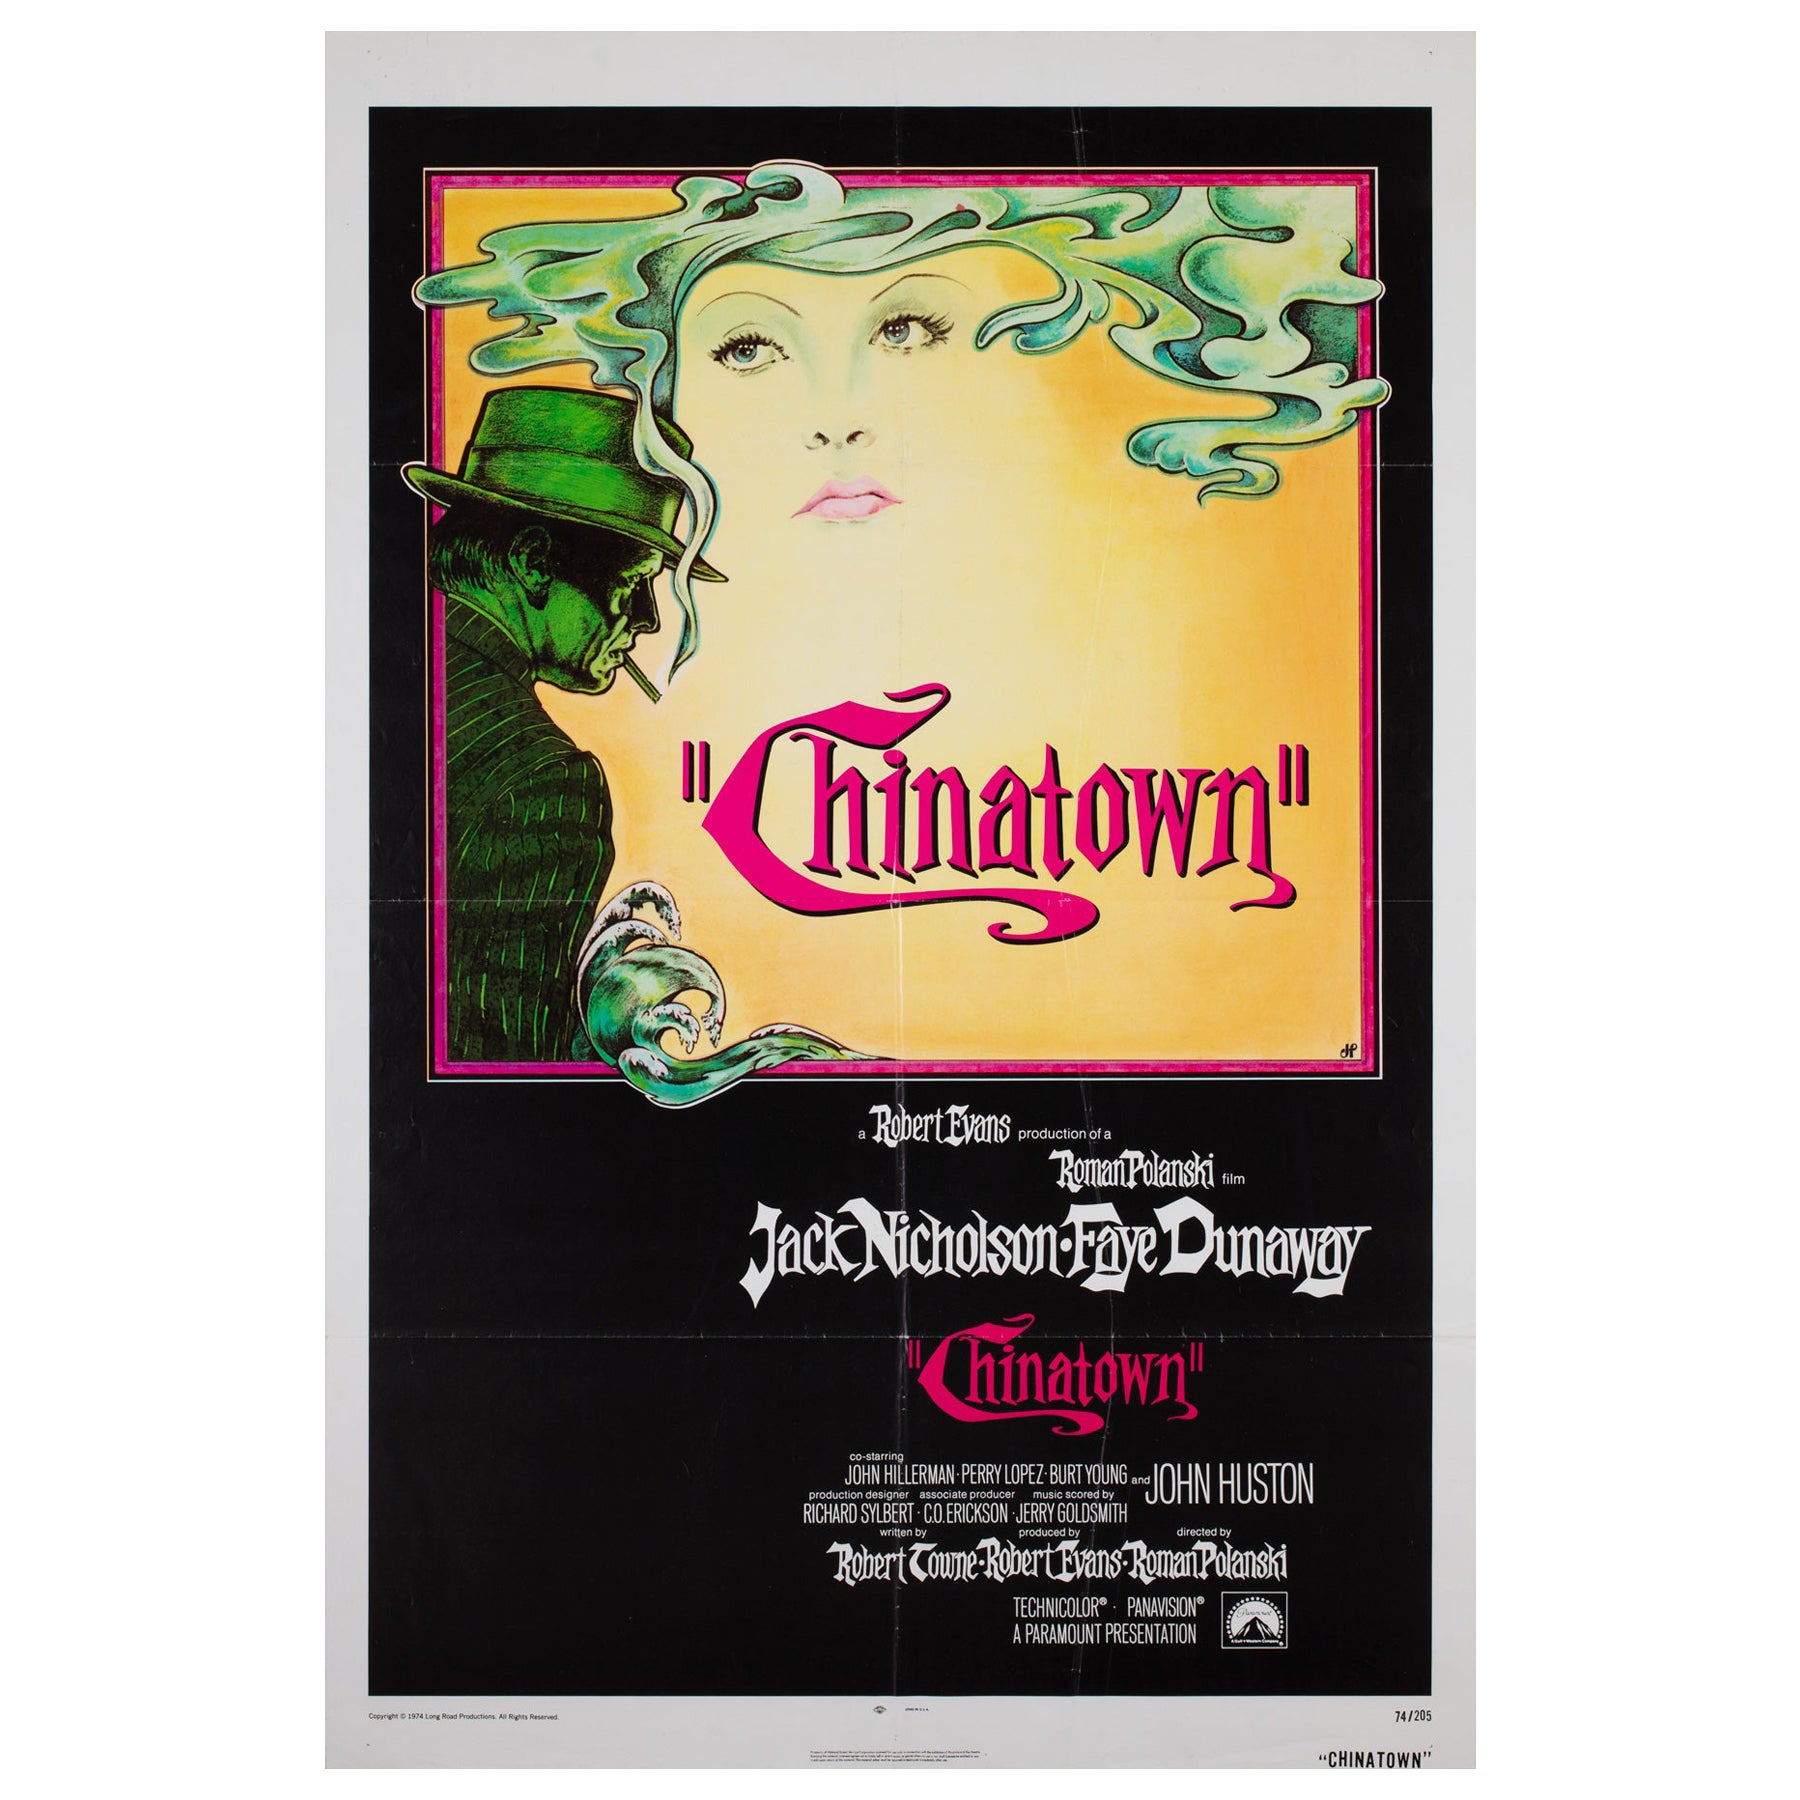 CHINATOWN 1974 US 1 Sheet Film Movie Poster,  PEARSALL, Nicholson, Dunaway For Sale